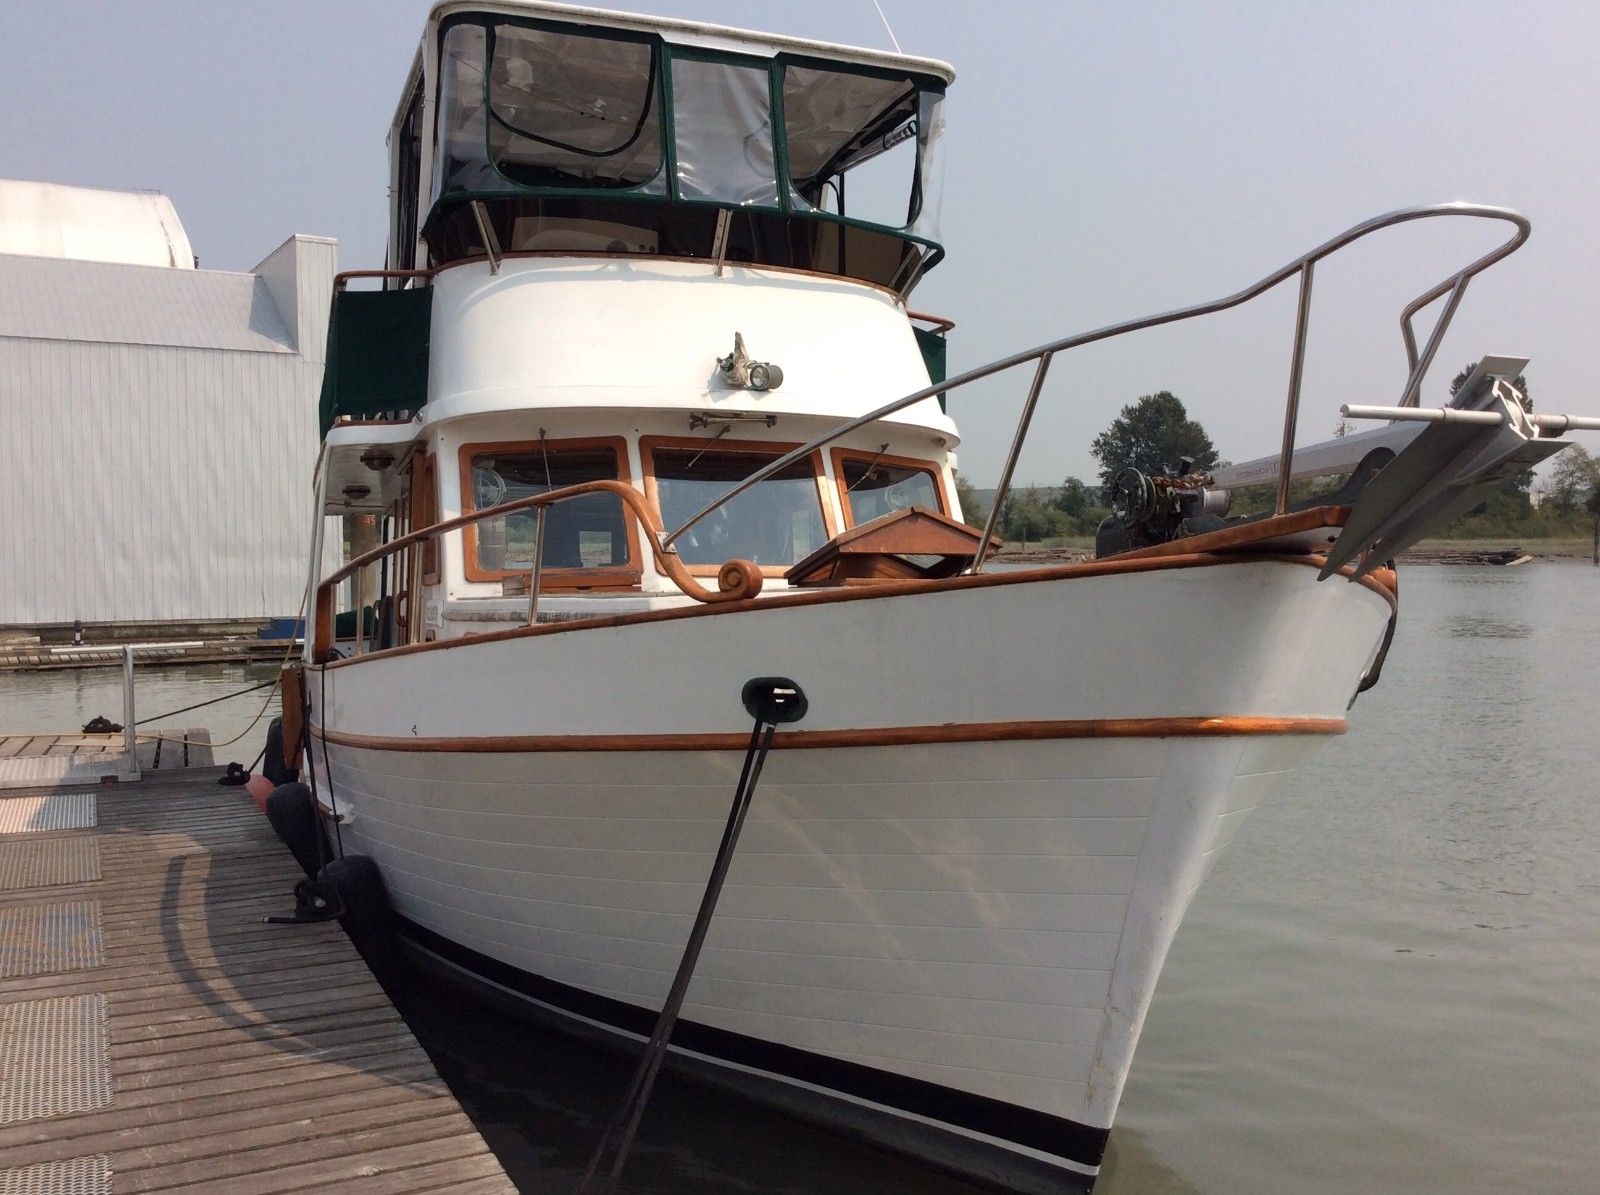 CHB Puget Europa Trawler 1977 for sale for $ - Boats-from-USA.com